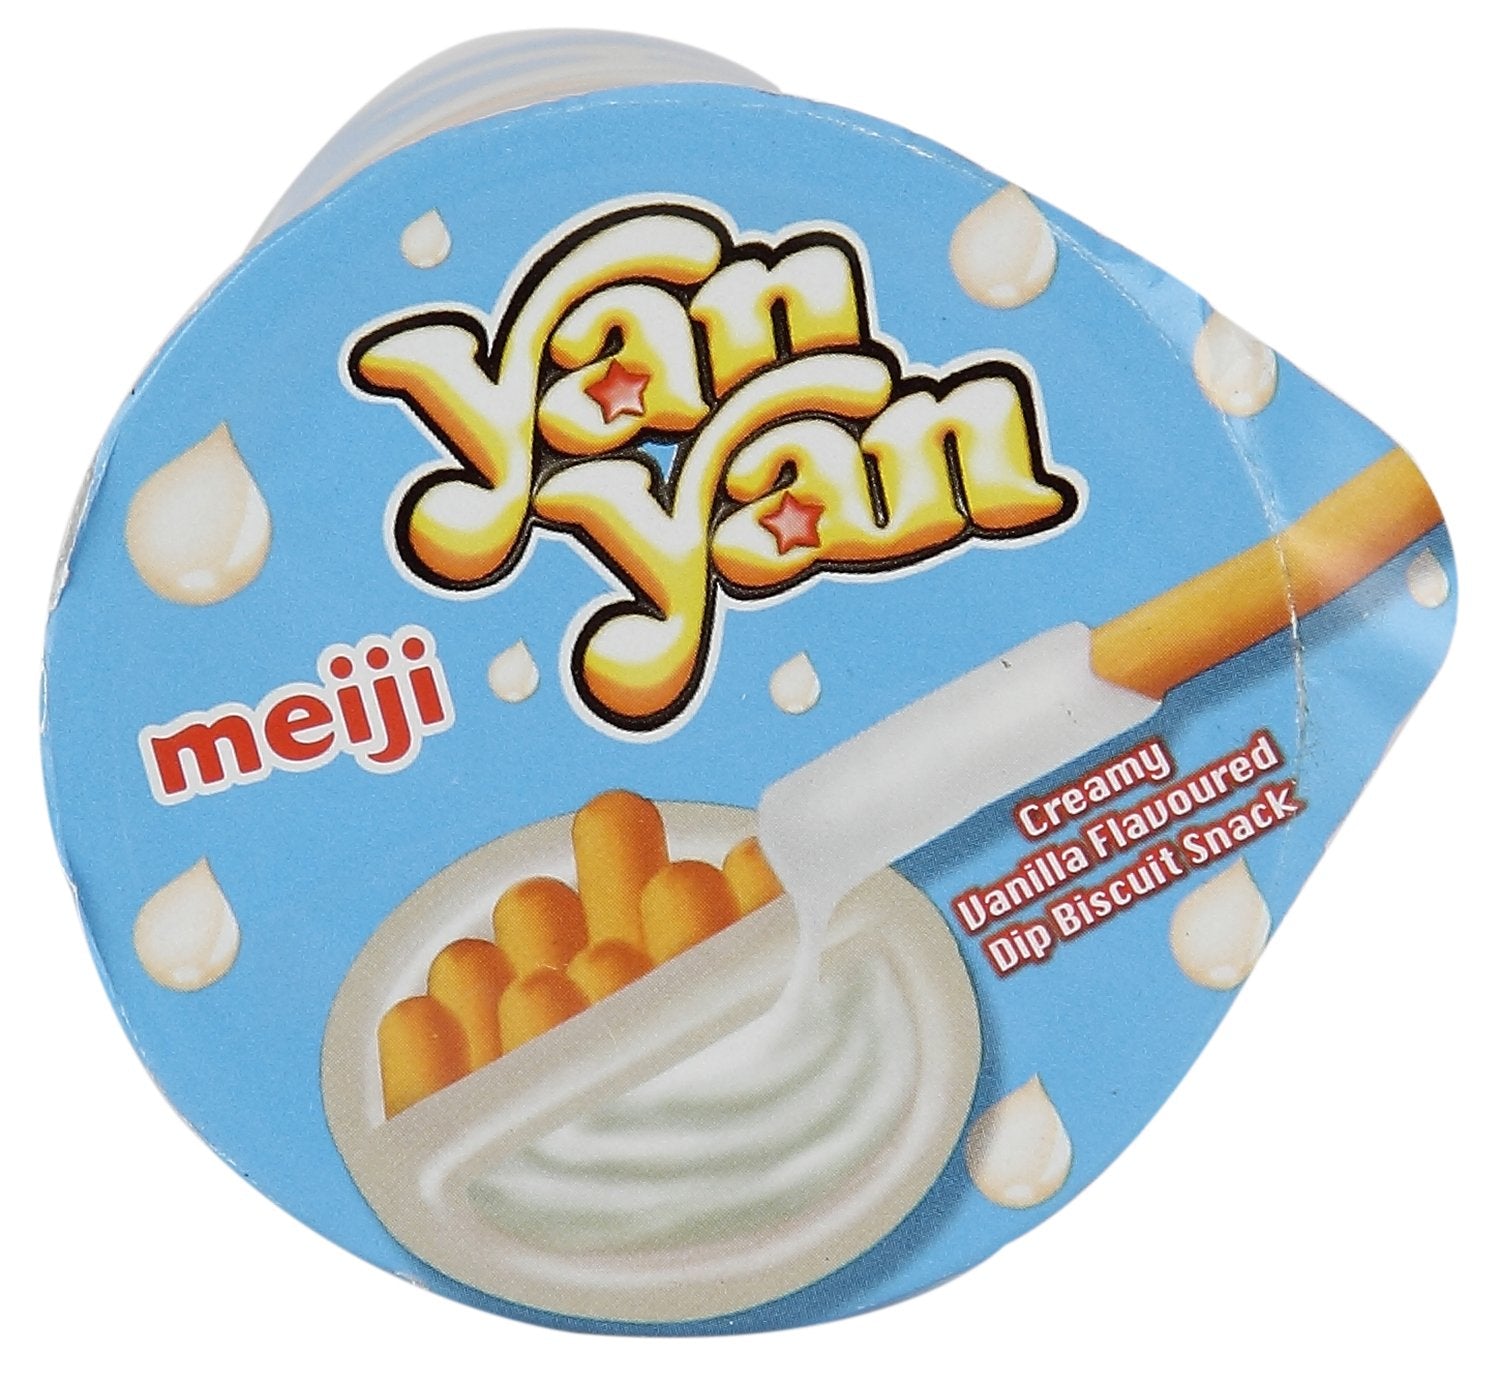 Meiji Yan Yan Cracker Sticks with Creme for Dipping, 2 oz, 2 Flavors of  Each Chocolate, Vanilla, Strawberry - Total Pack of 6